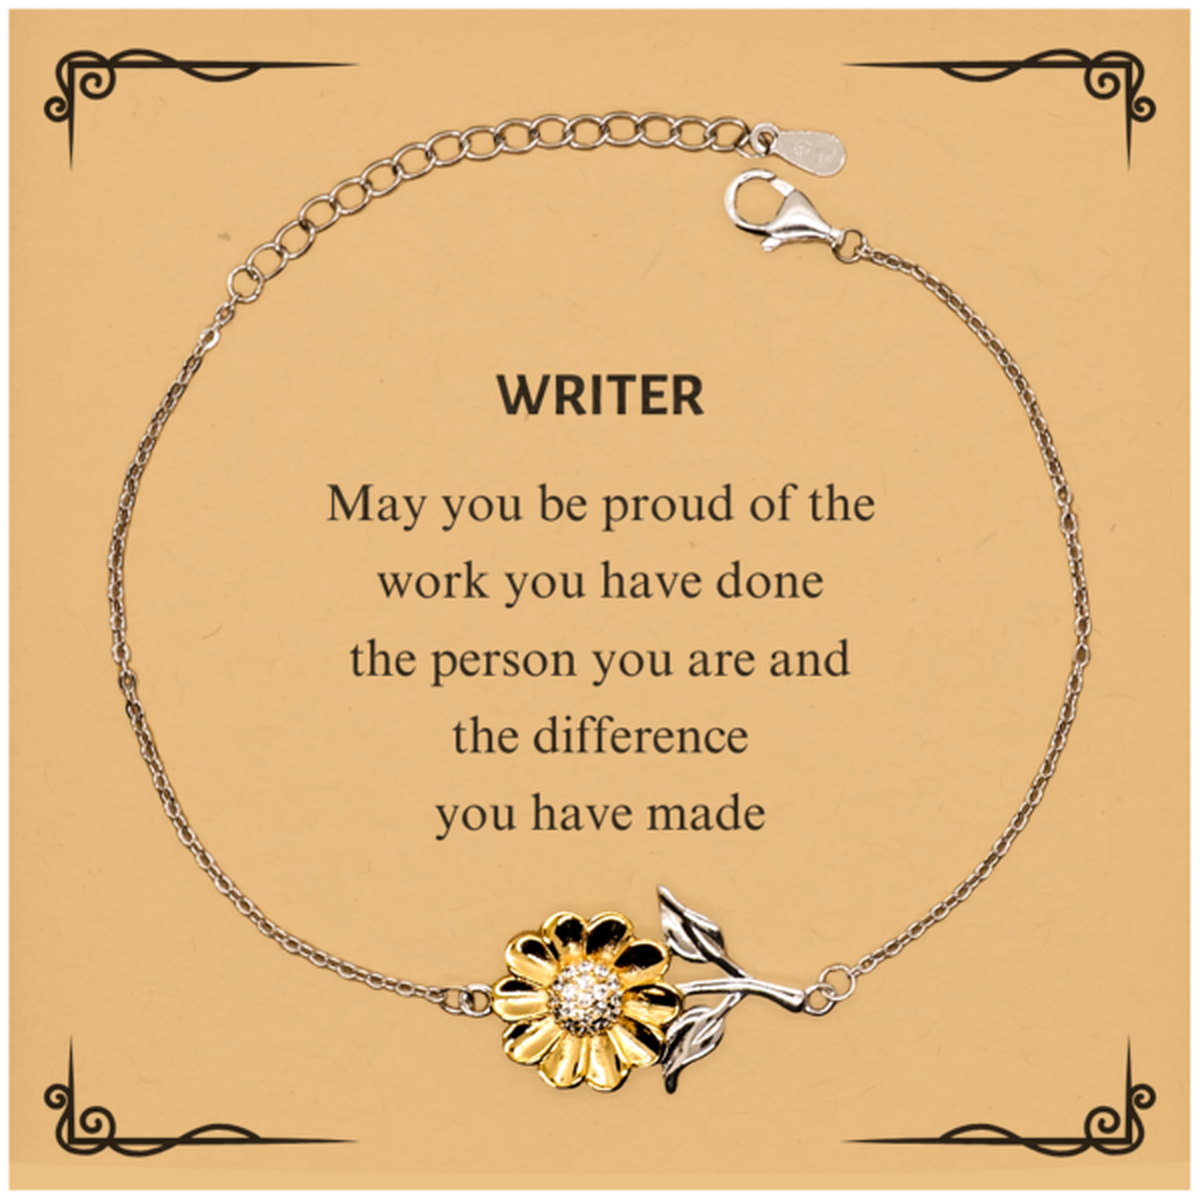 Writer May you be proud of the work you have done, Retirement Writer Sunflower Bracelet for Colleague Appreciation Gifts Amazing for Writer